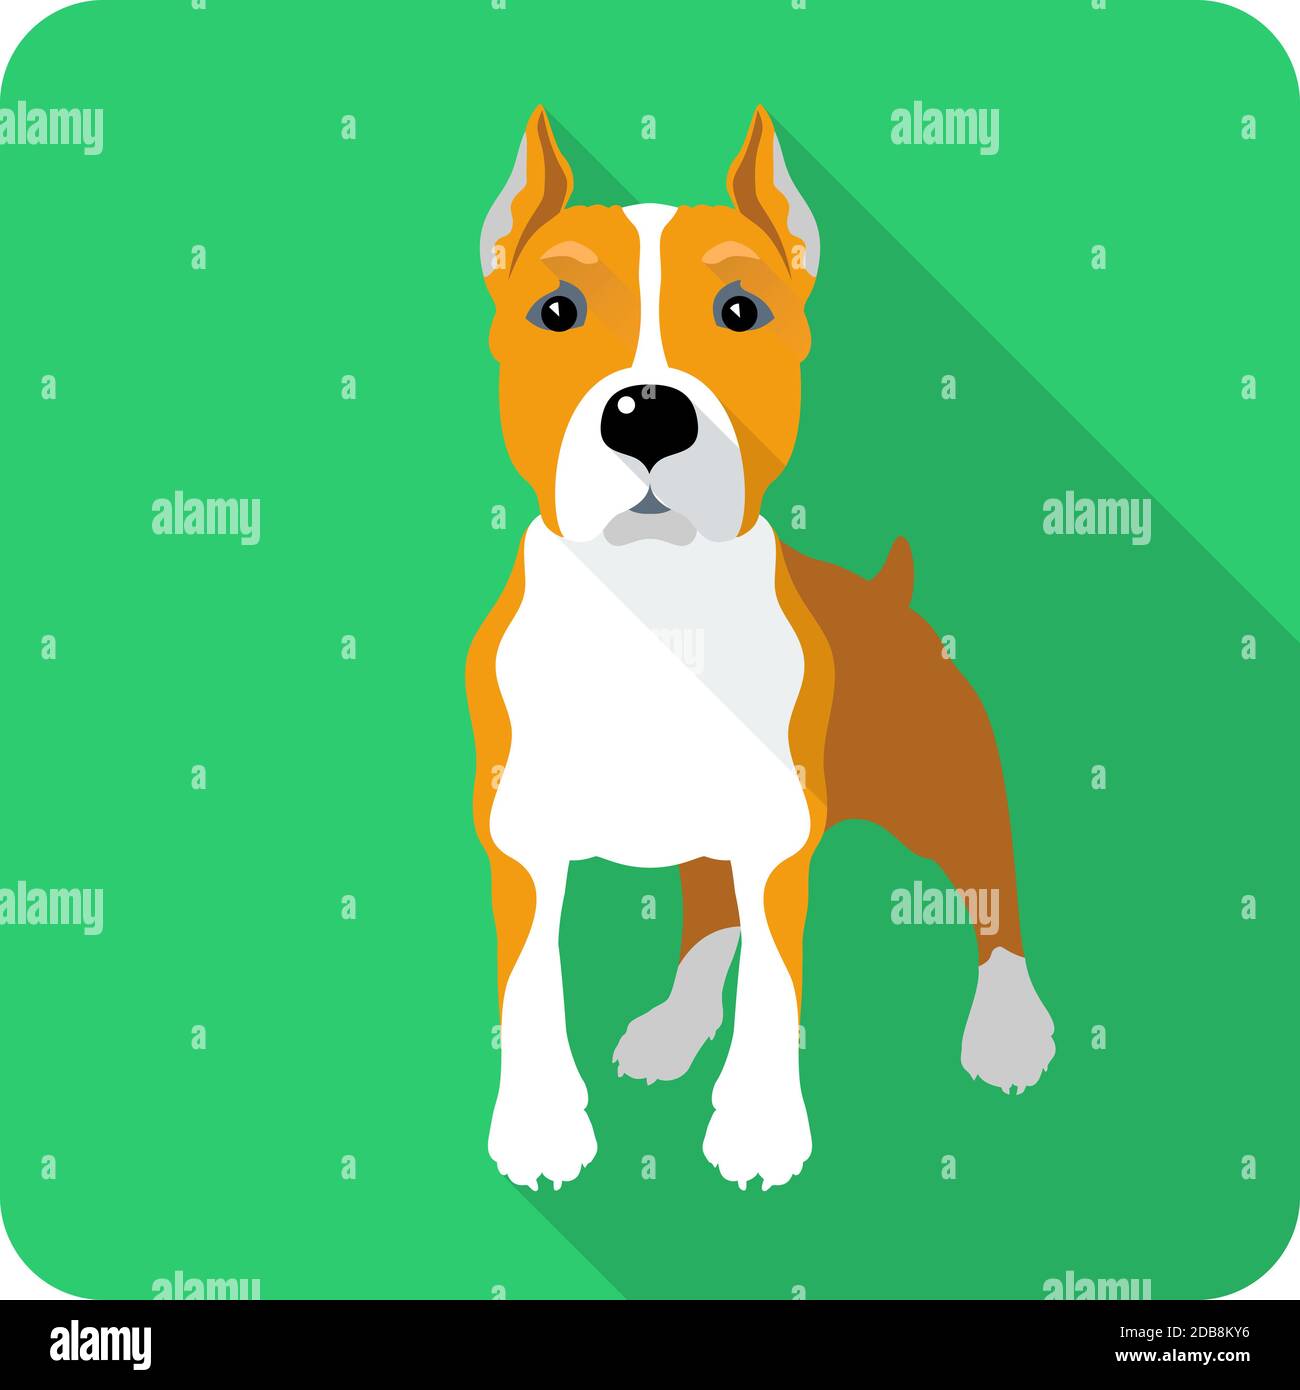 dog American Staffordshire Terrier standing icon flat design Stock Photo